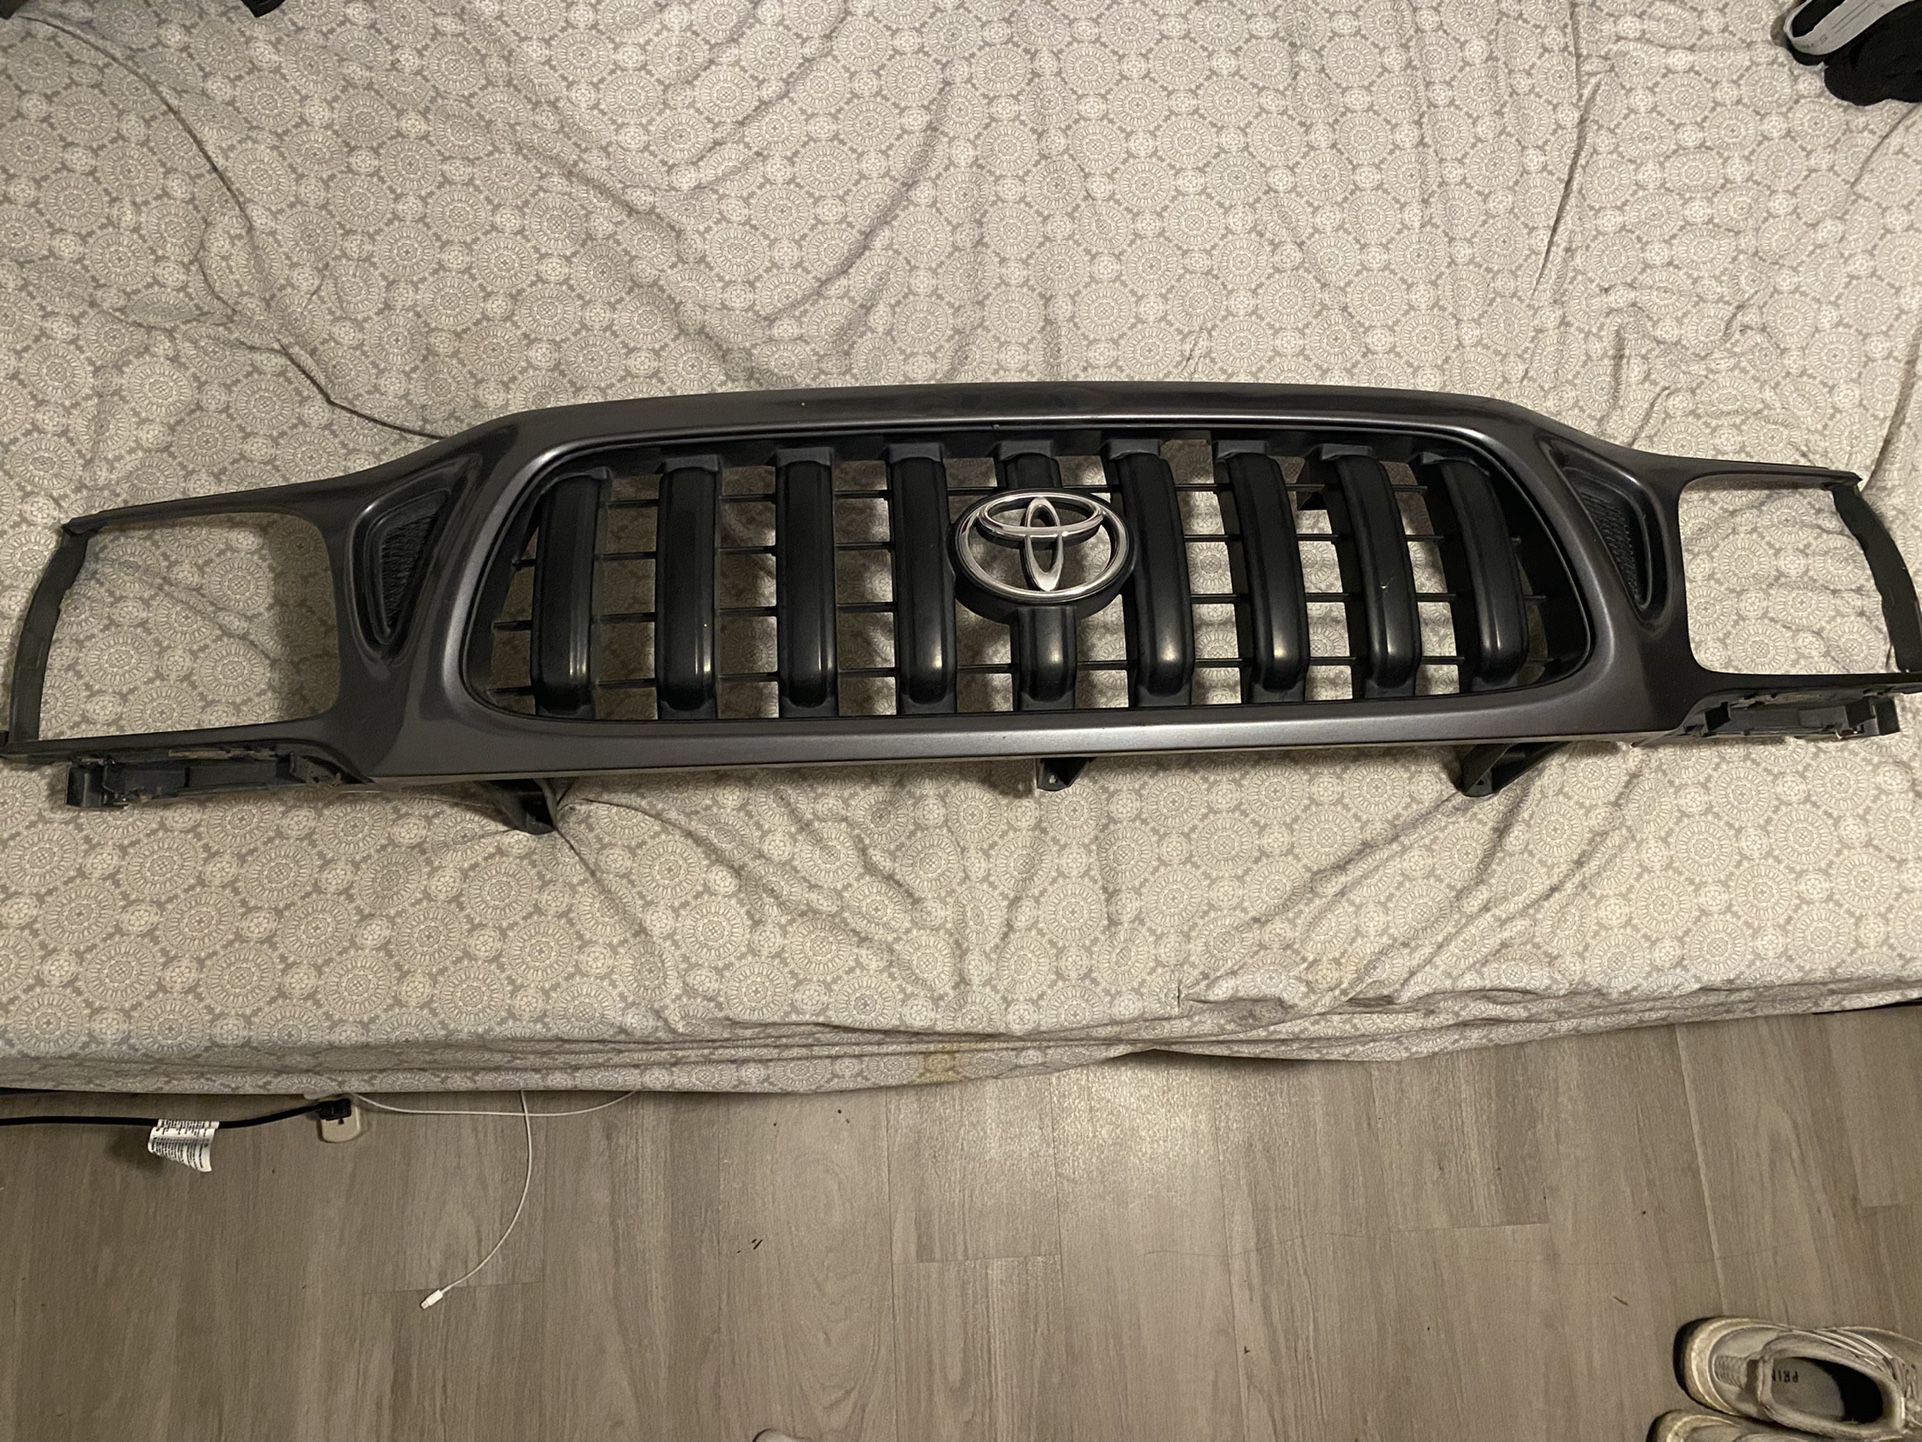 OEM Grille Off 04 Tacoma 